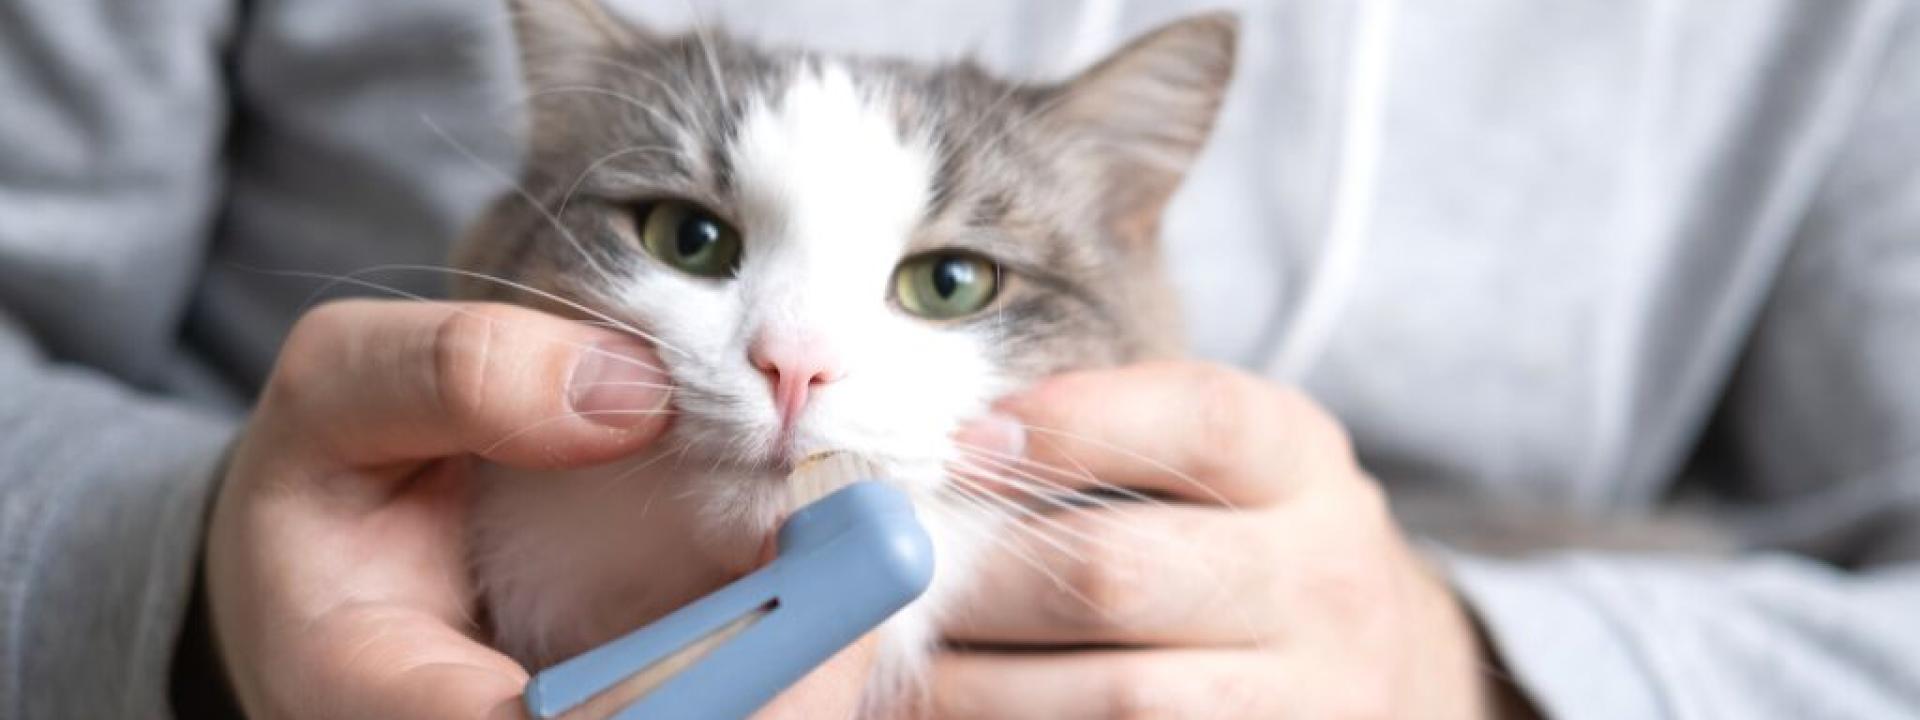 Person brushing cat's teeth with animal toothbrush.